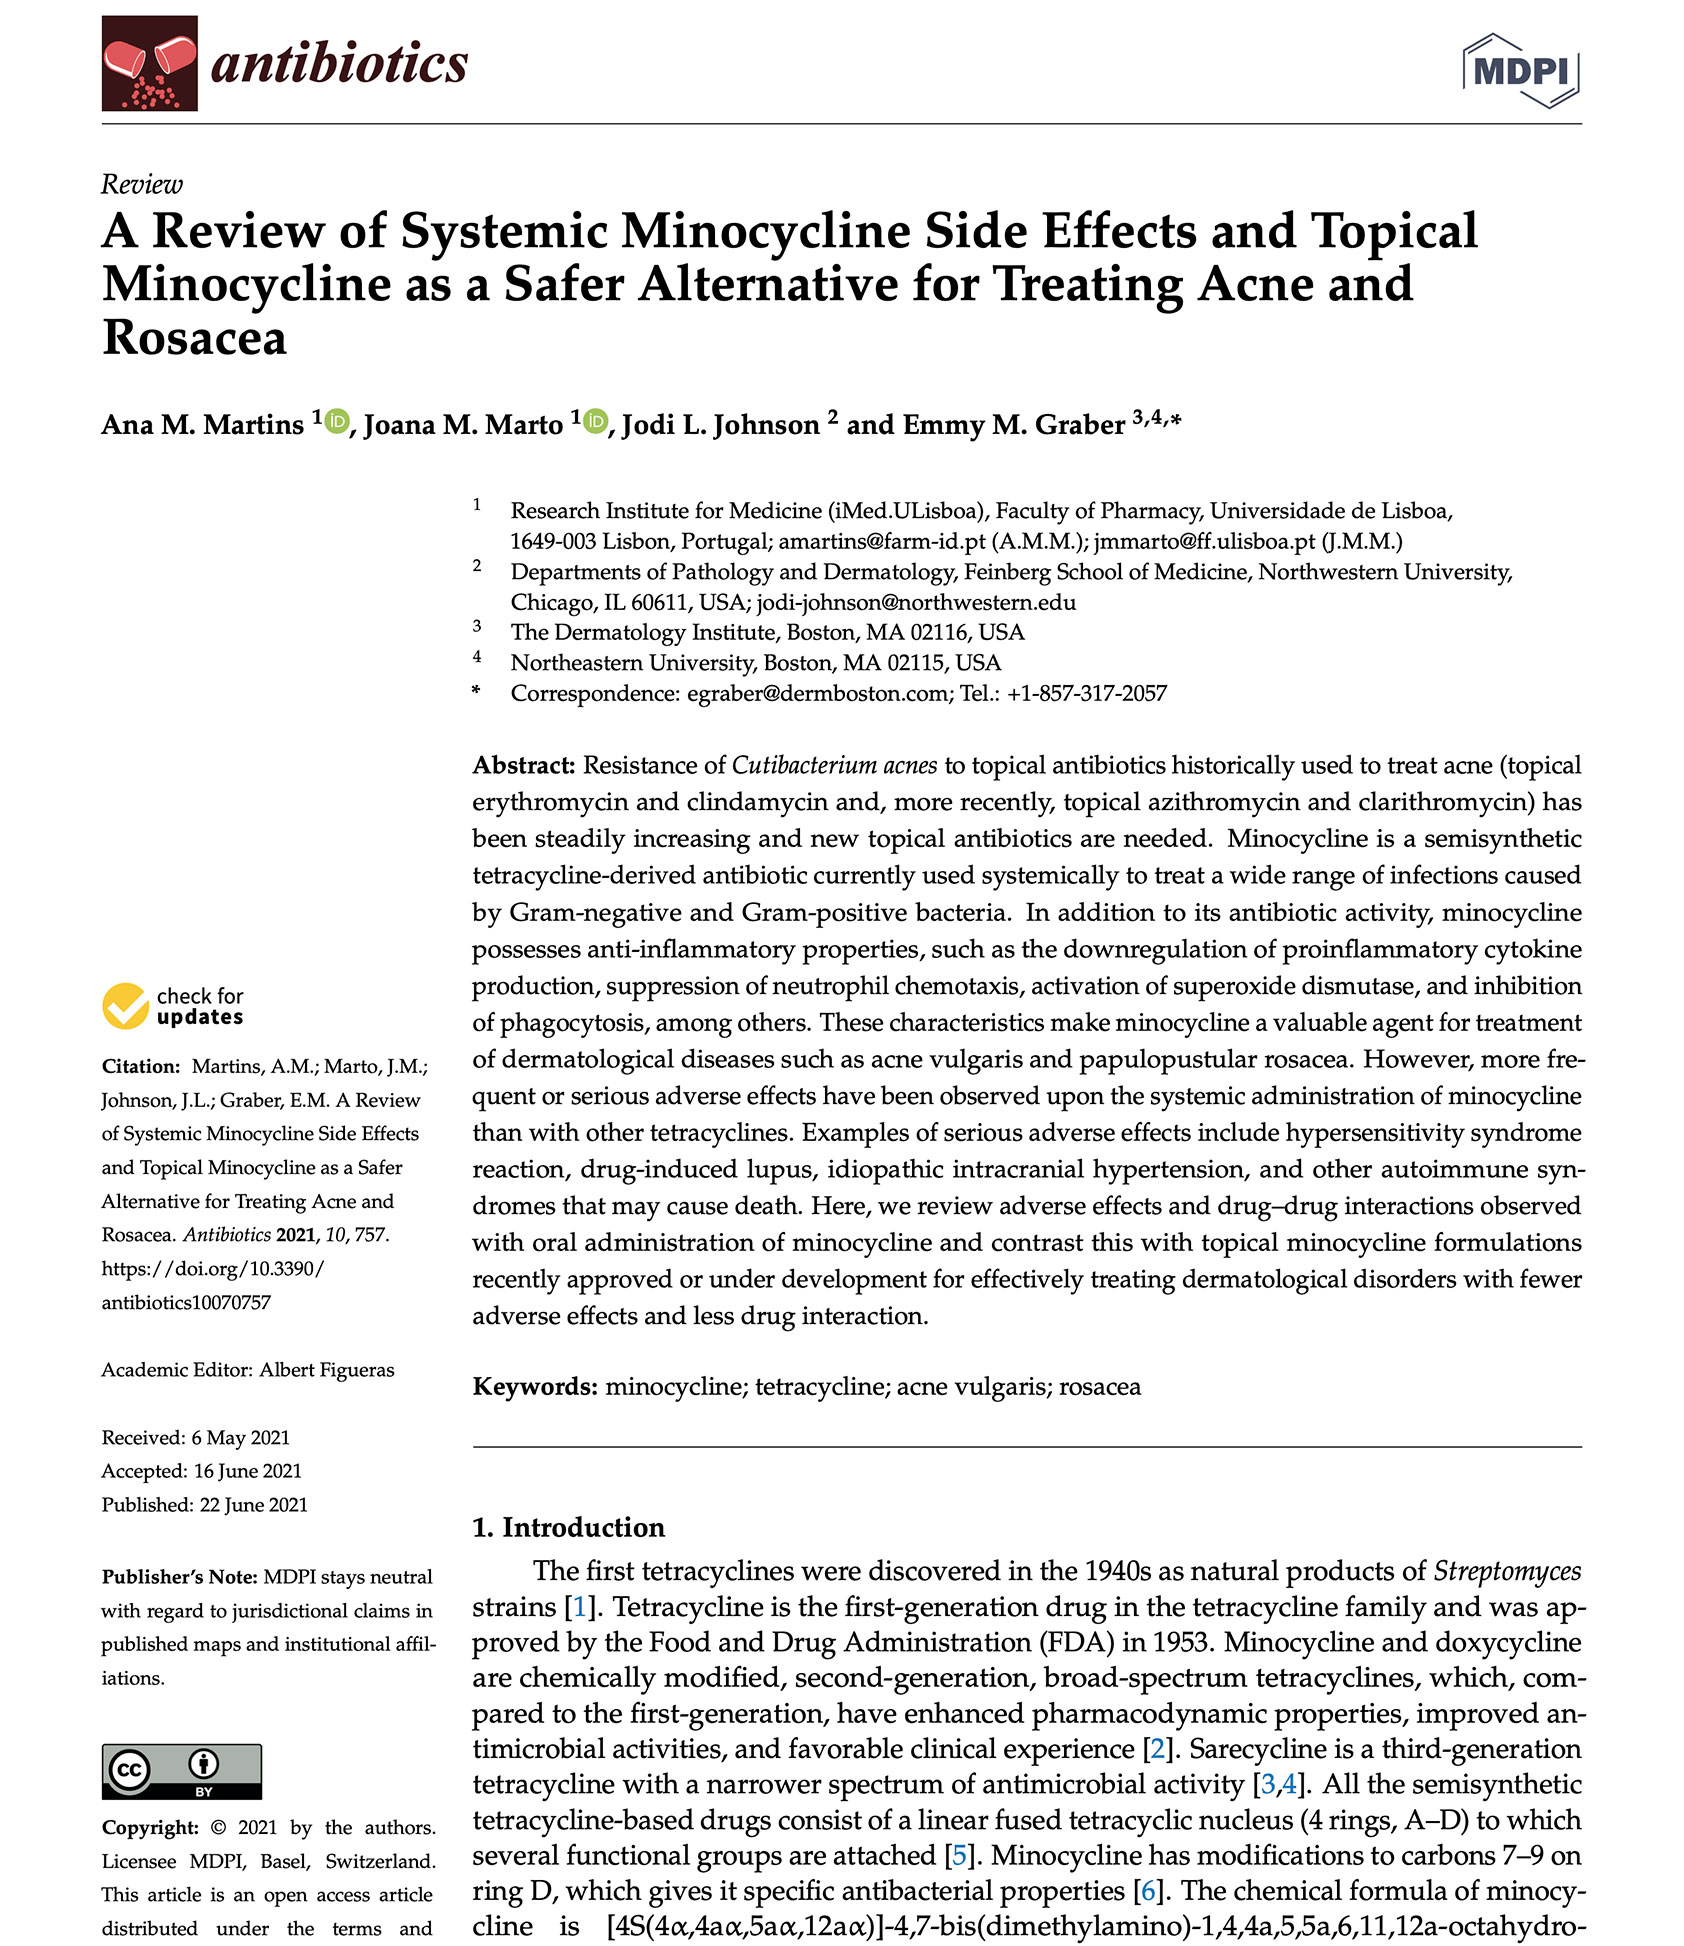 A Review of Systemic Minocycline Side Effects and Topical Minocycline